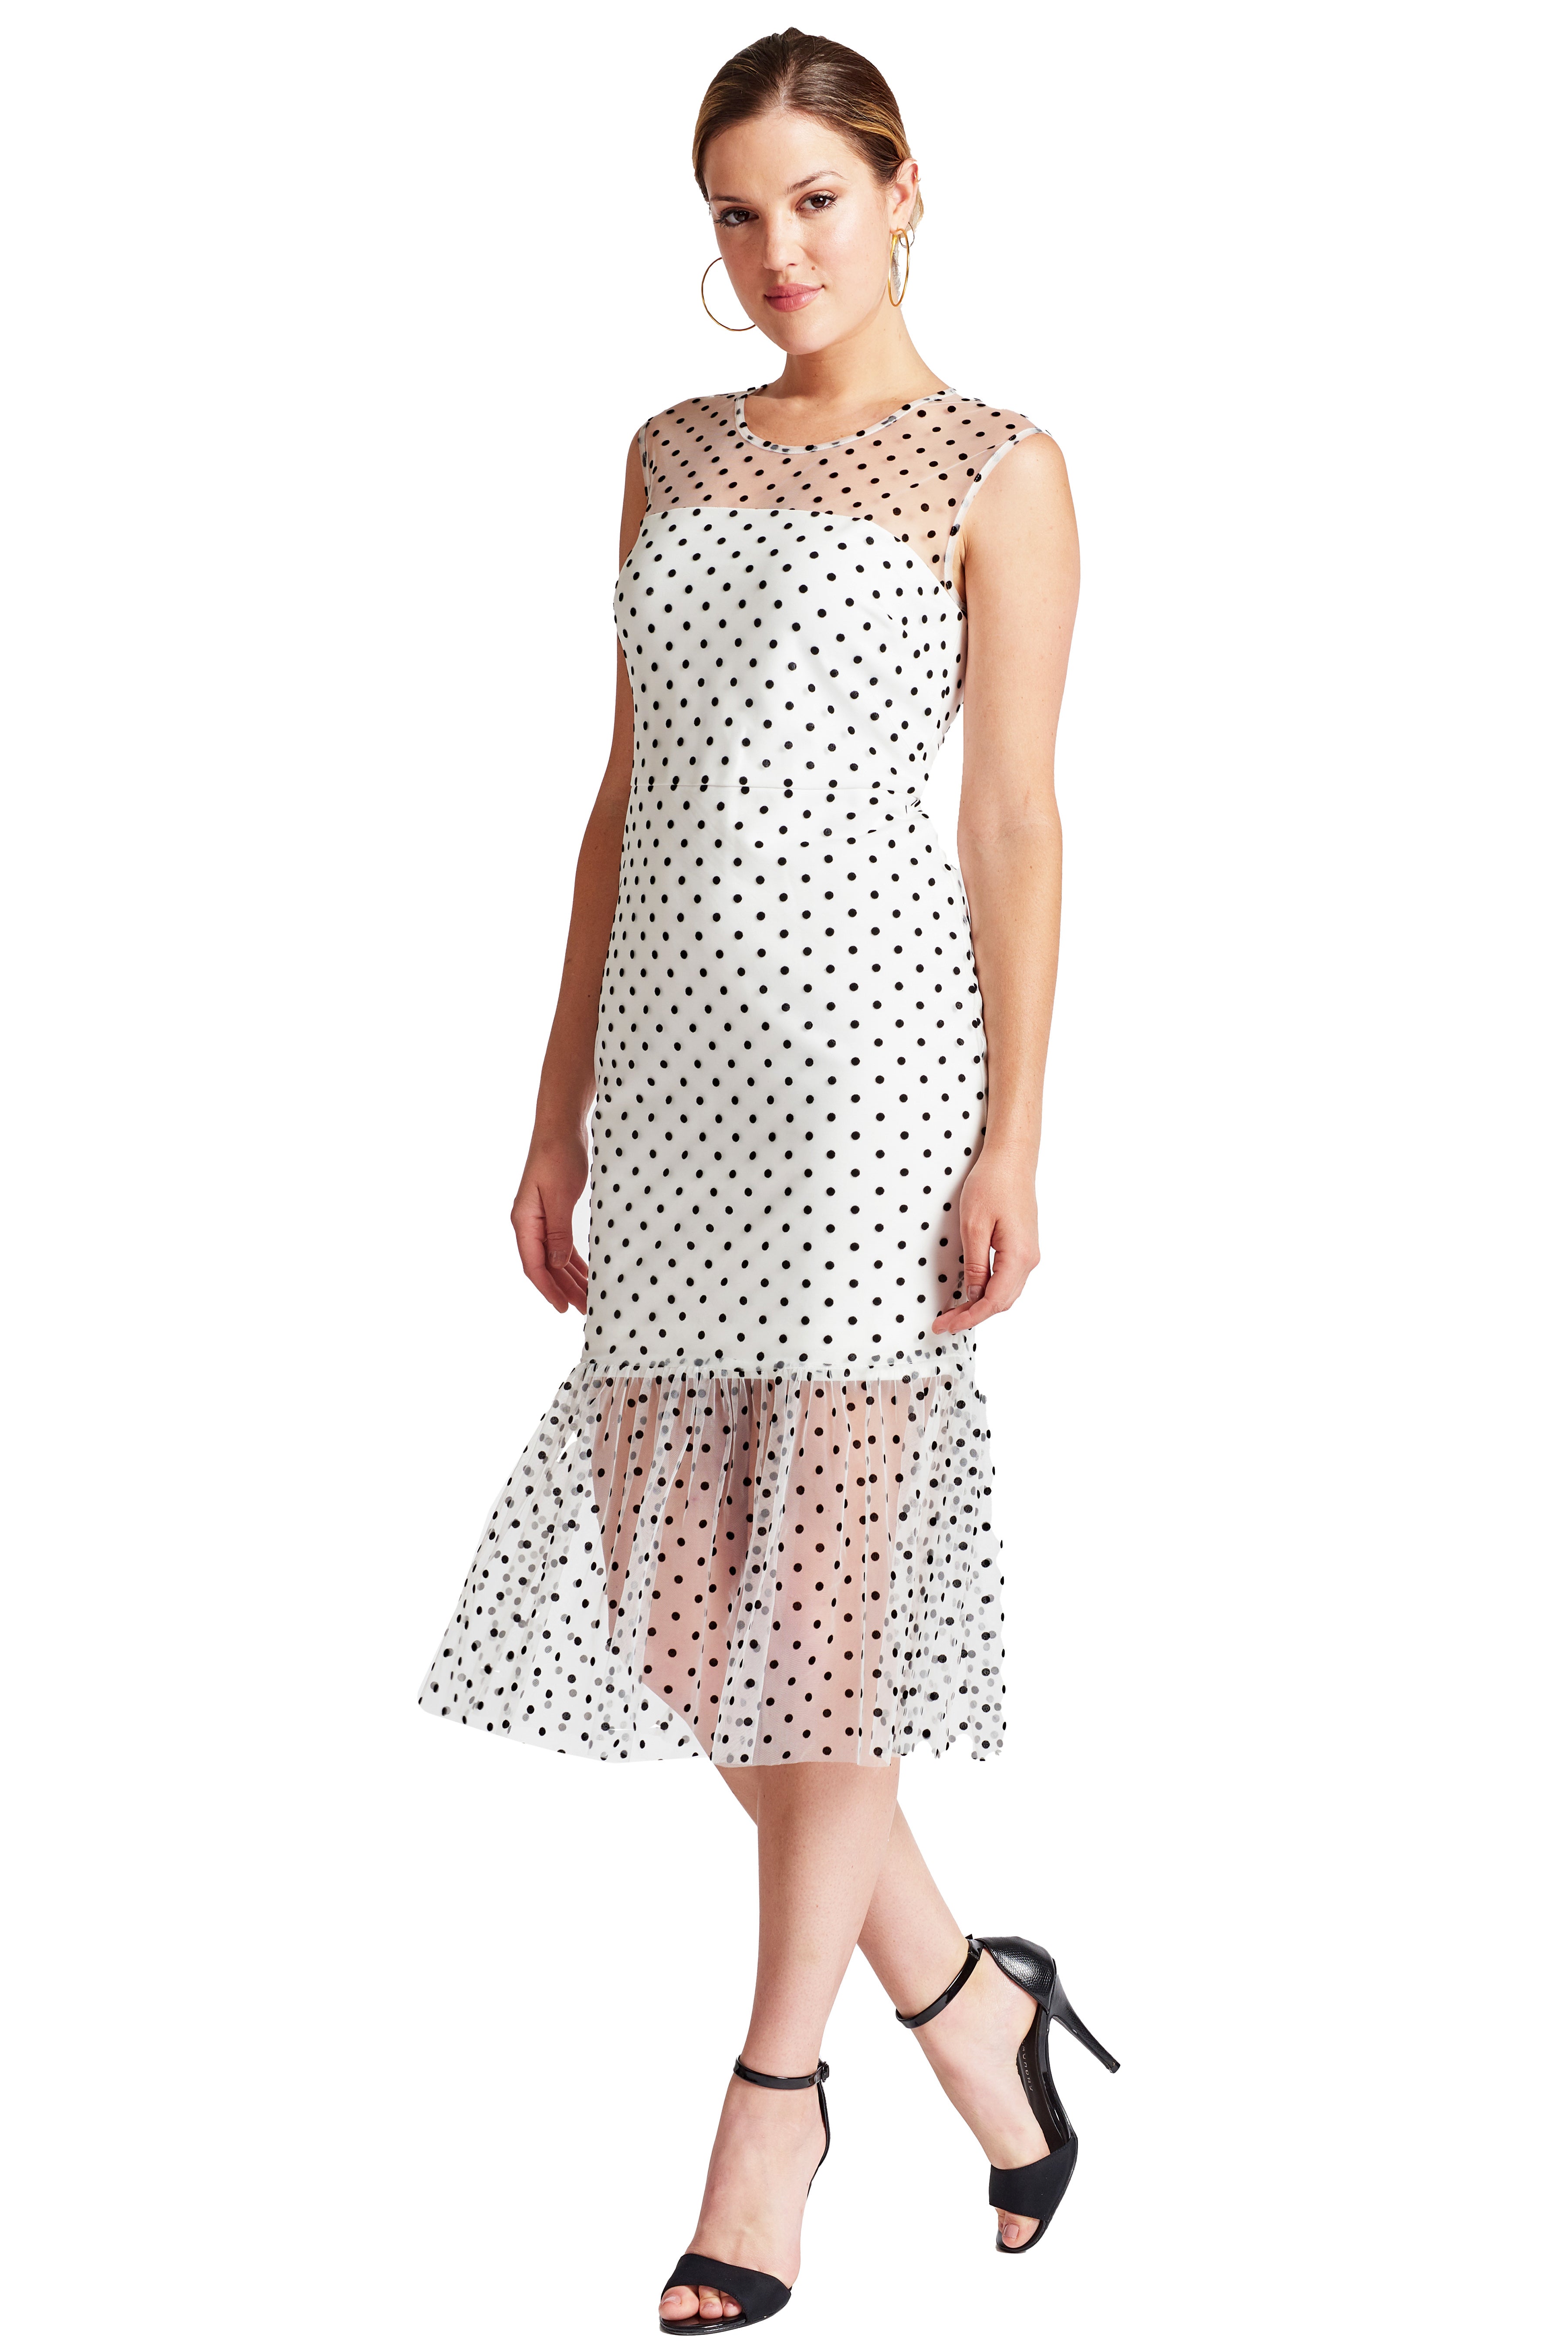 3/4 front view of model wearing the Simona Maghen Muse dress, white mesh with black polka dots sleeveless midi dress with sheer ruffle hem and round neckline.